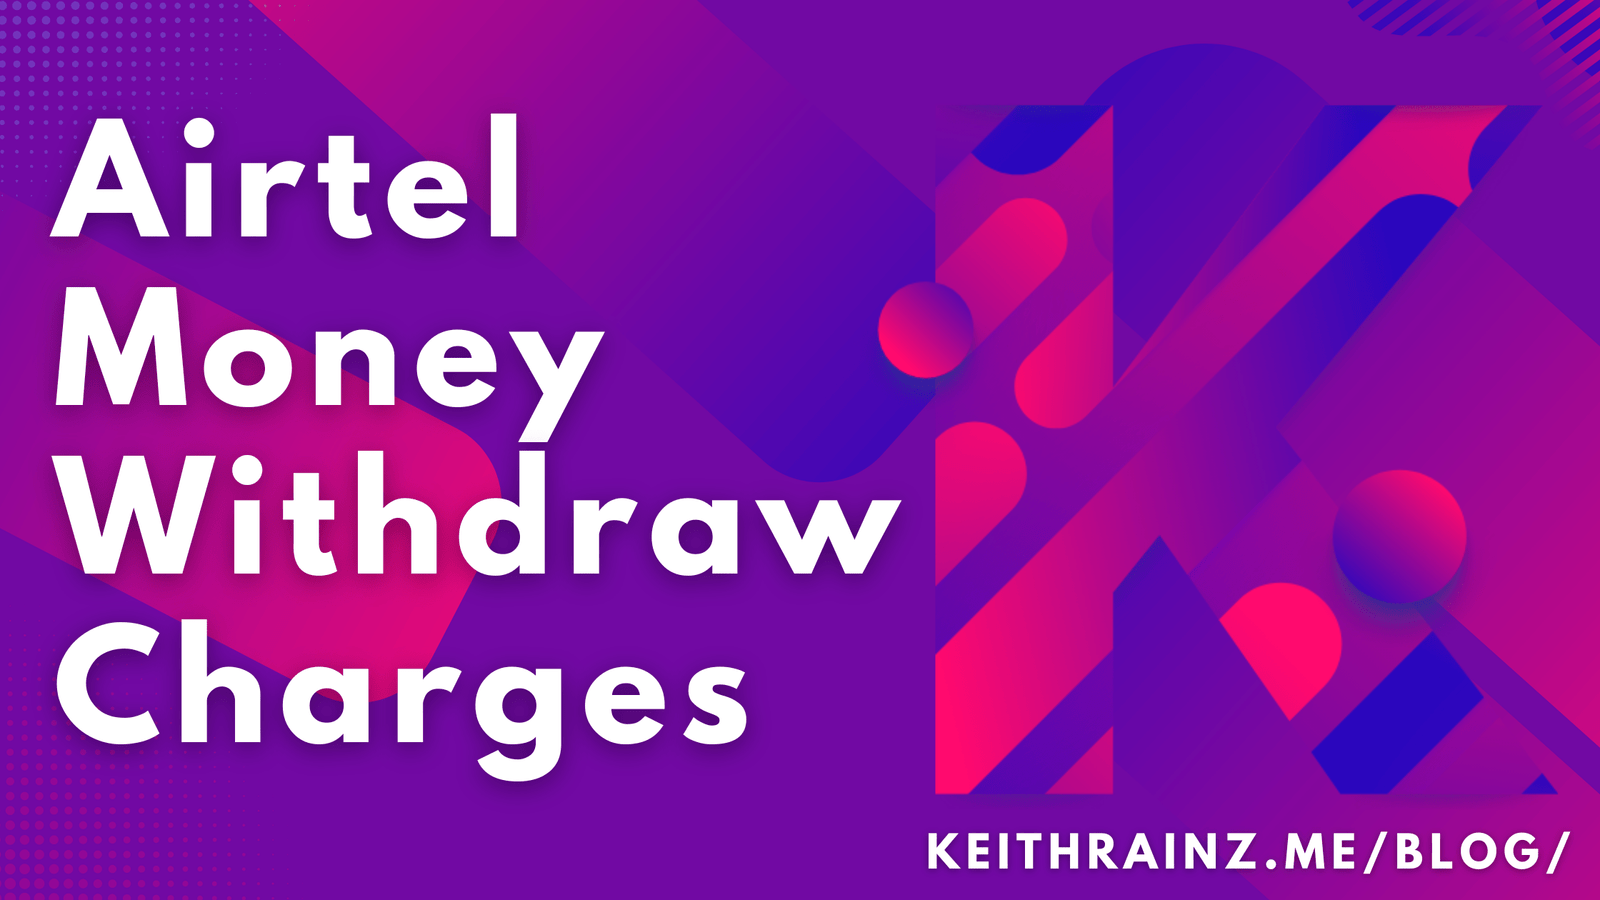 Airtel Money Withdraw Charges in 2022